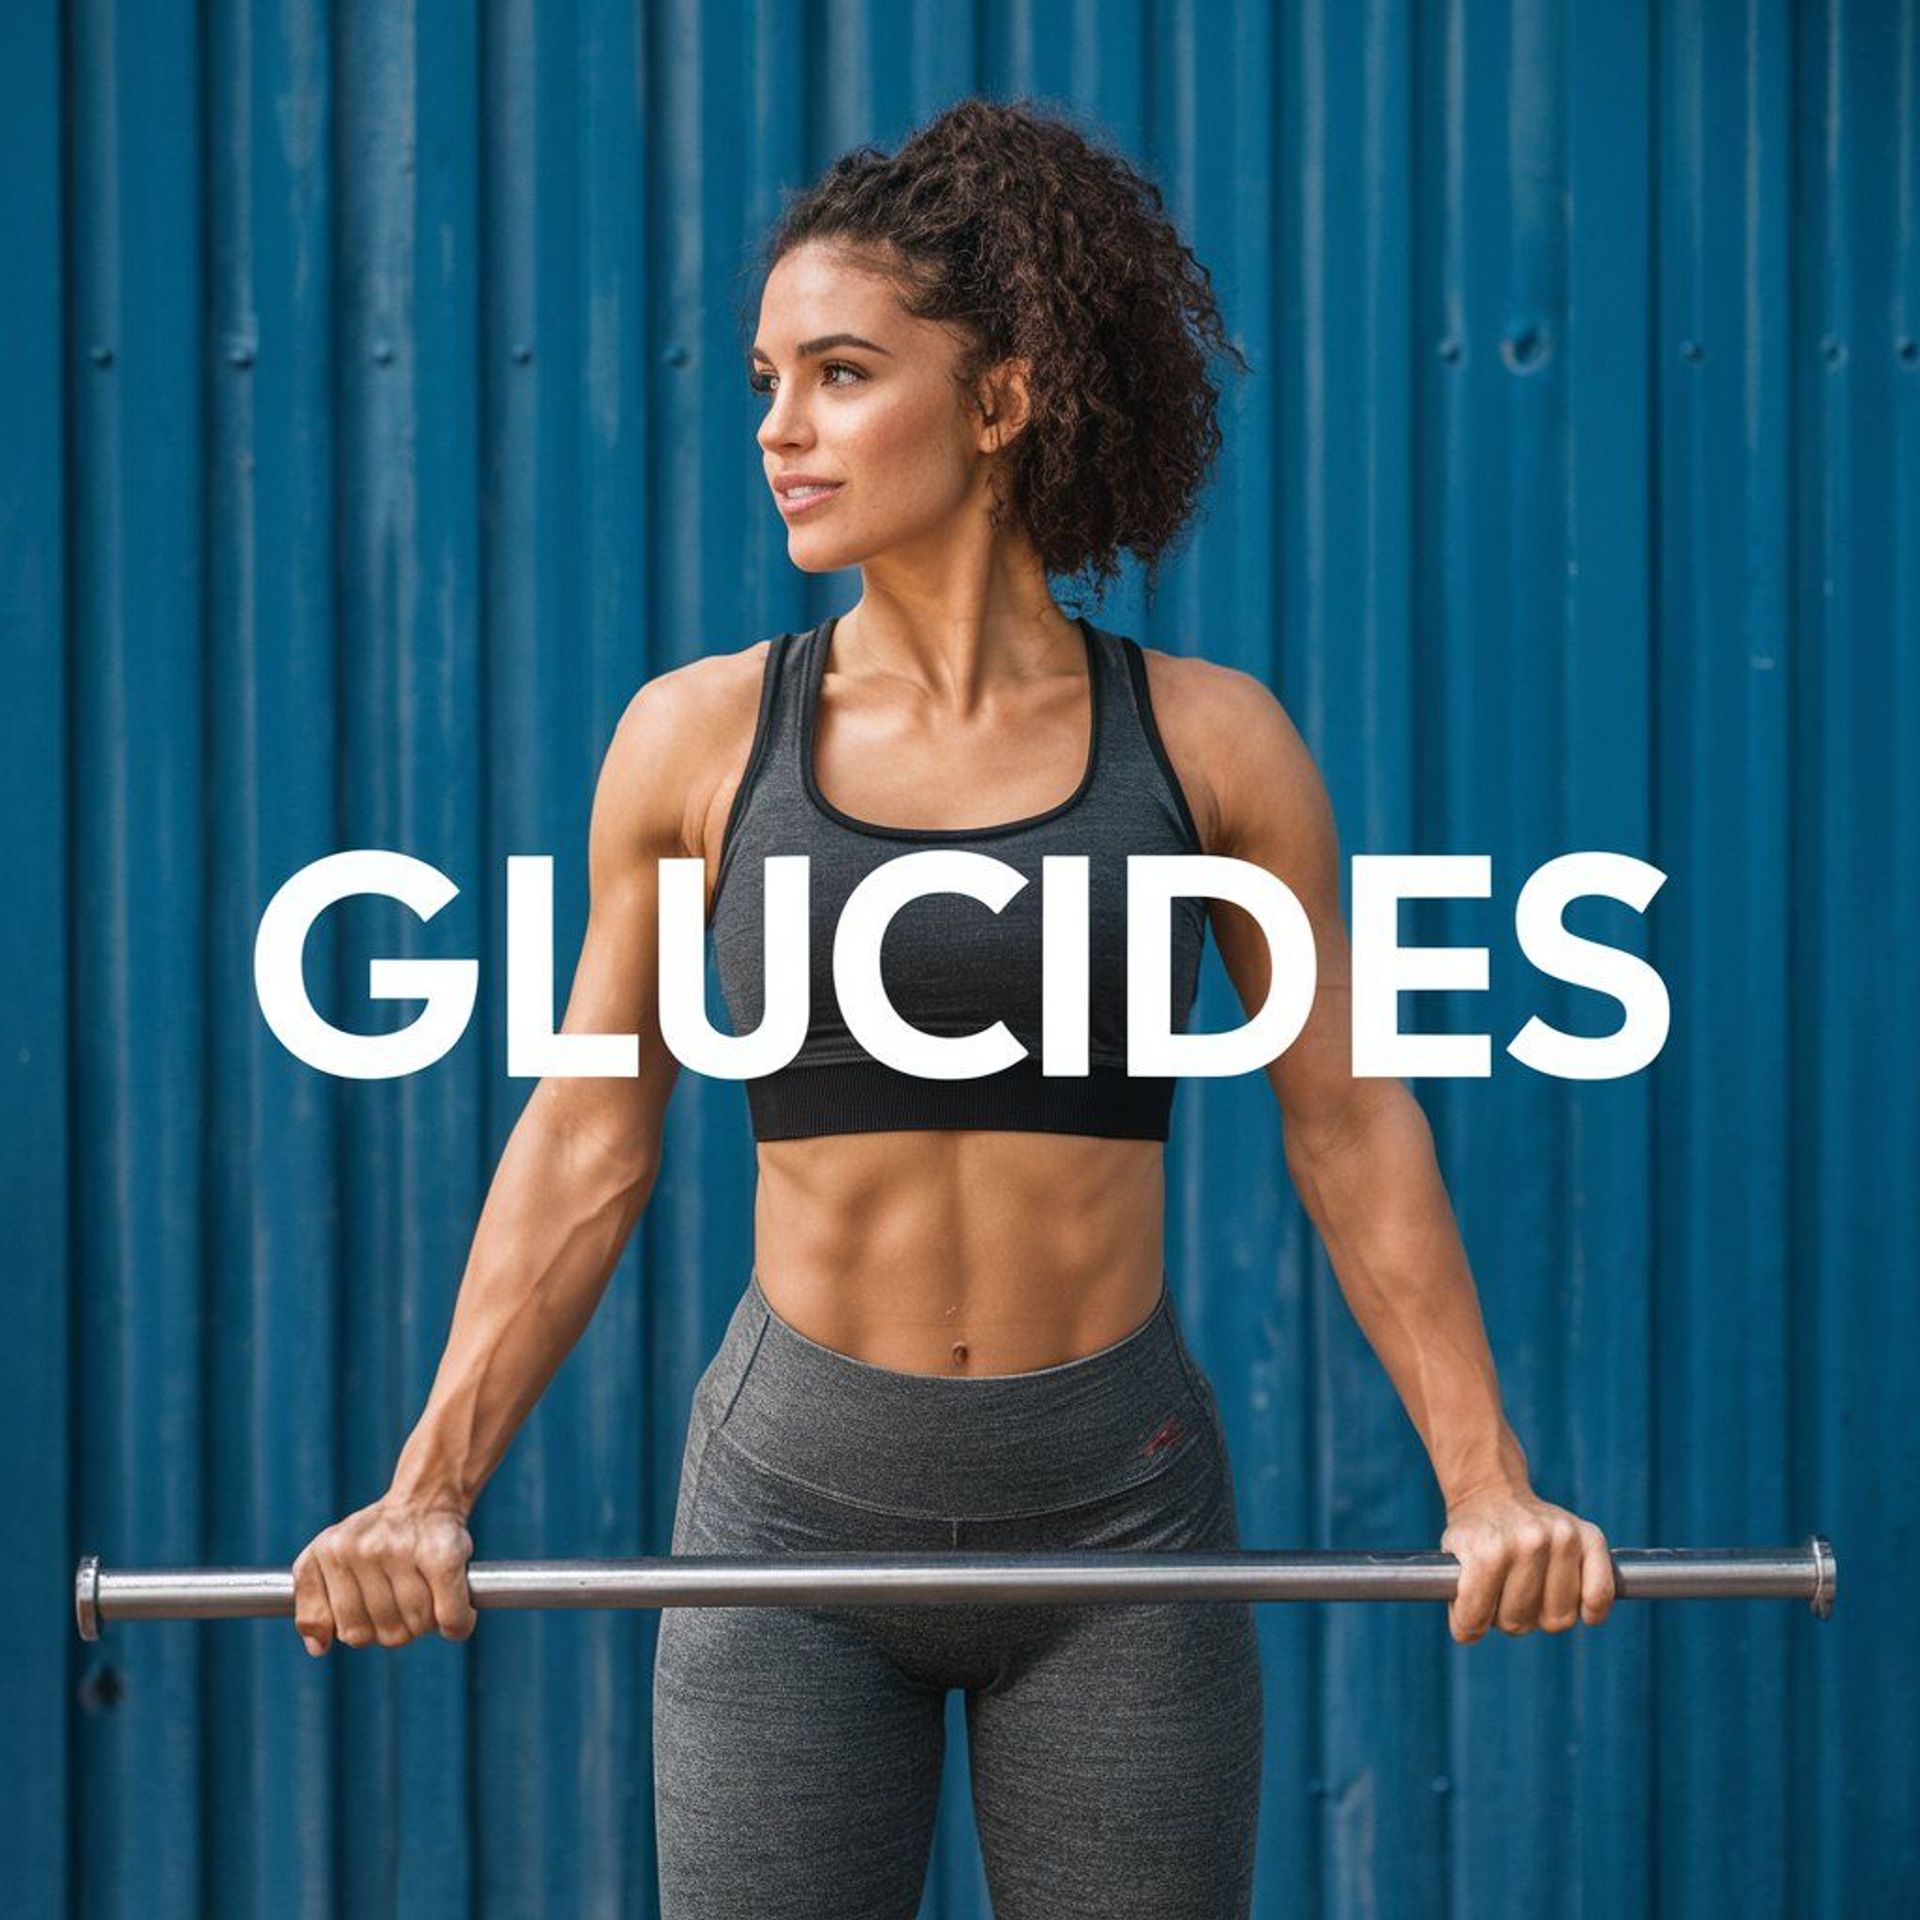 a woman is lifting a barbell with the word gulches in the background